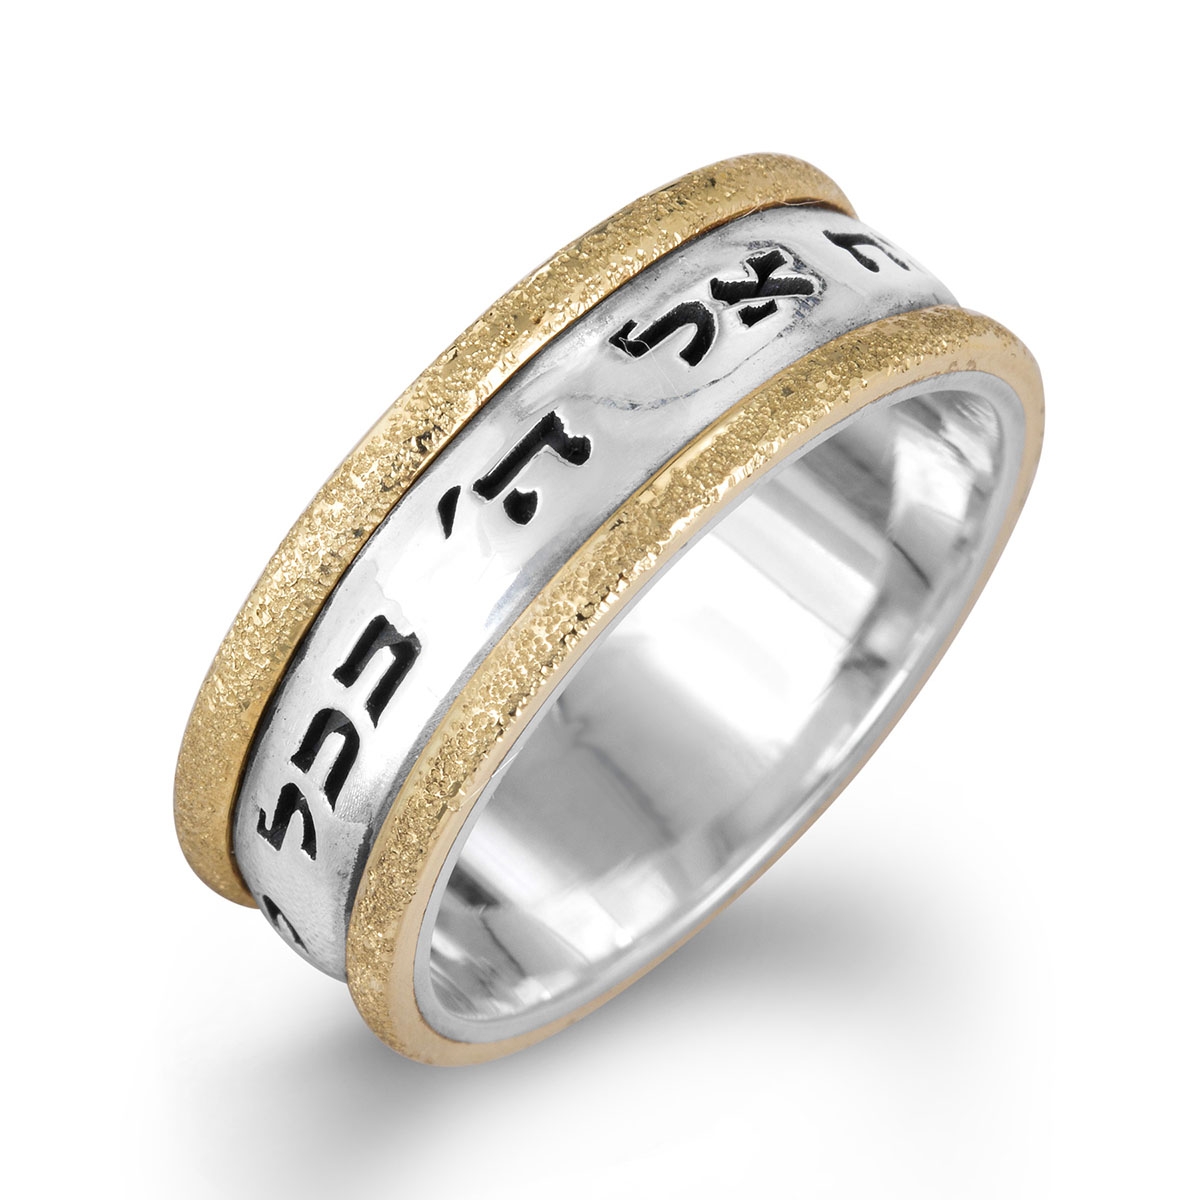 Sterling Silver Hebrew / English Personalized Ring with 14K Sparkling Gold Stripes - 6